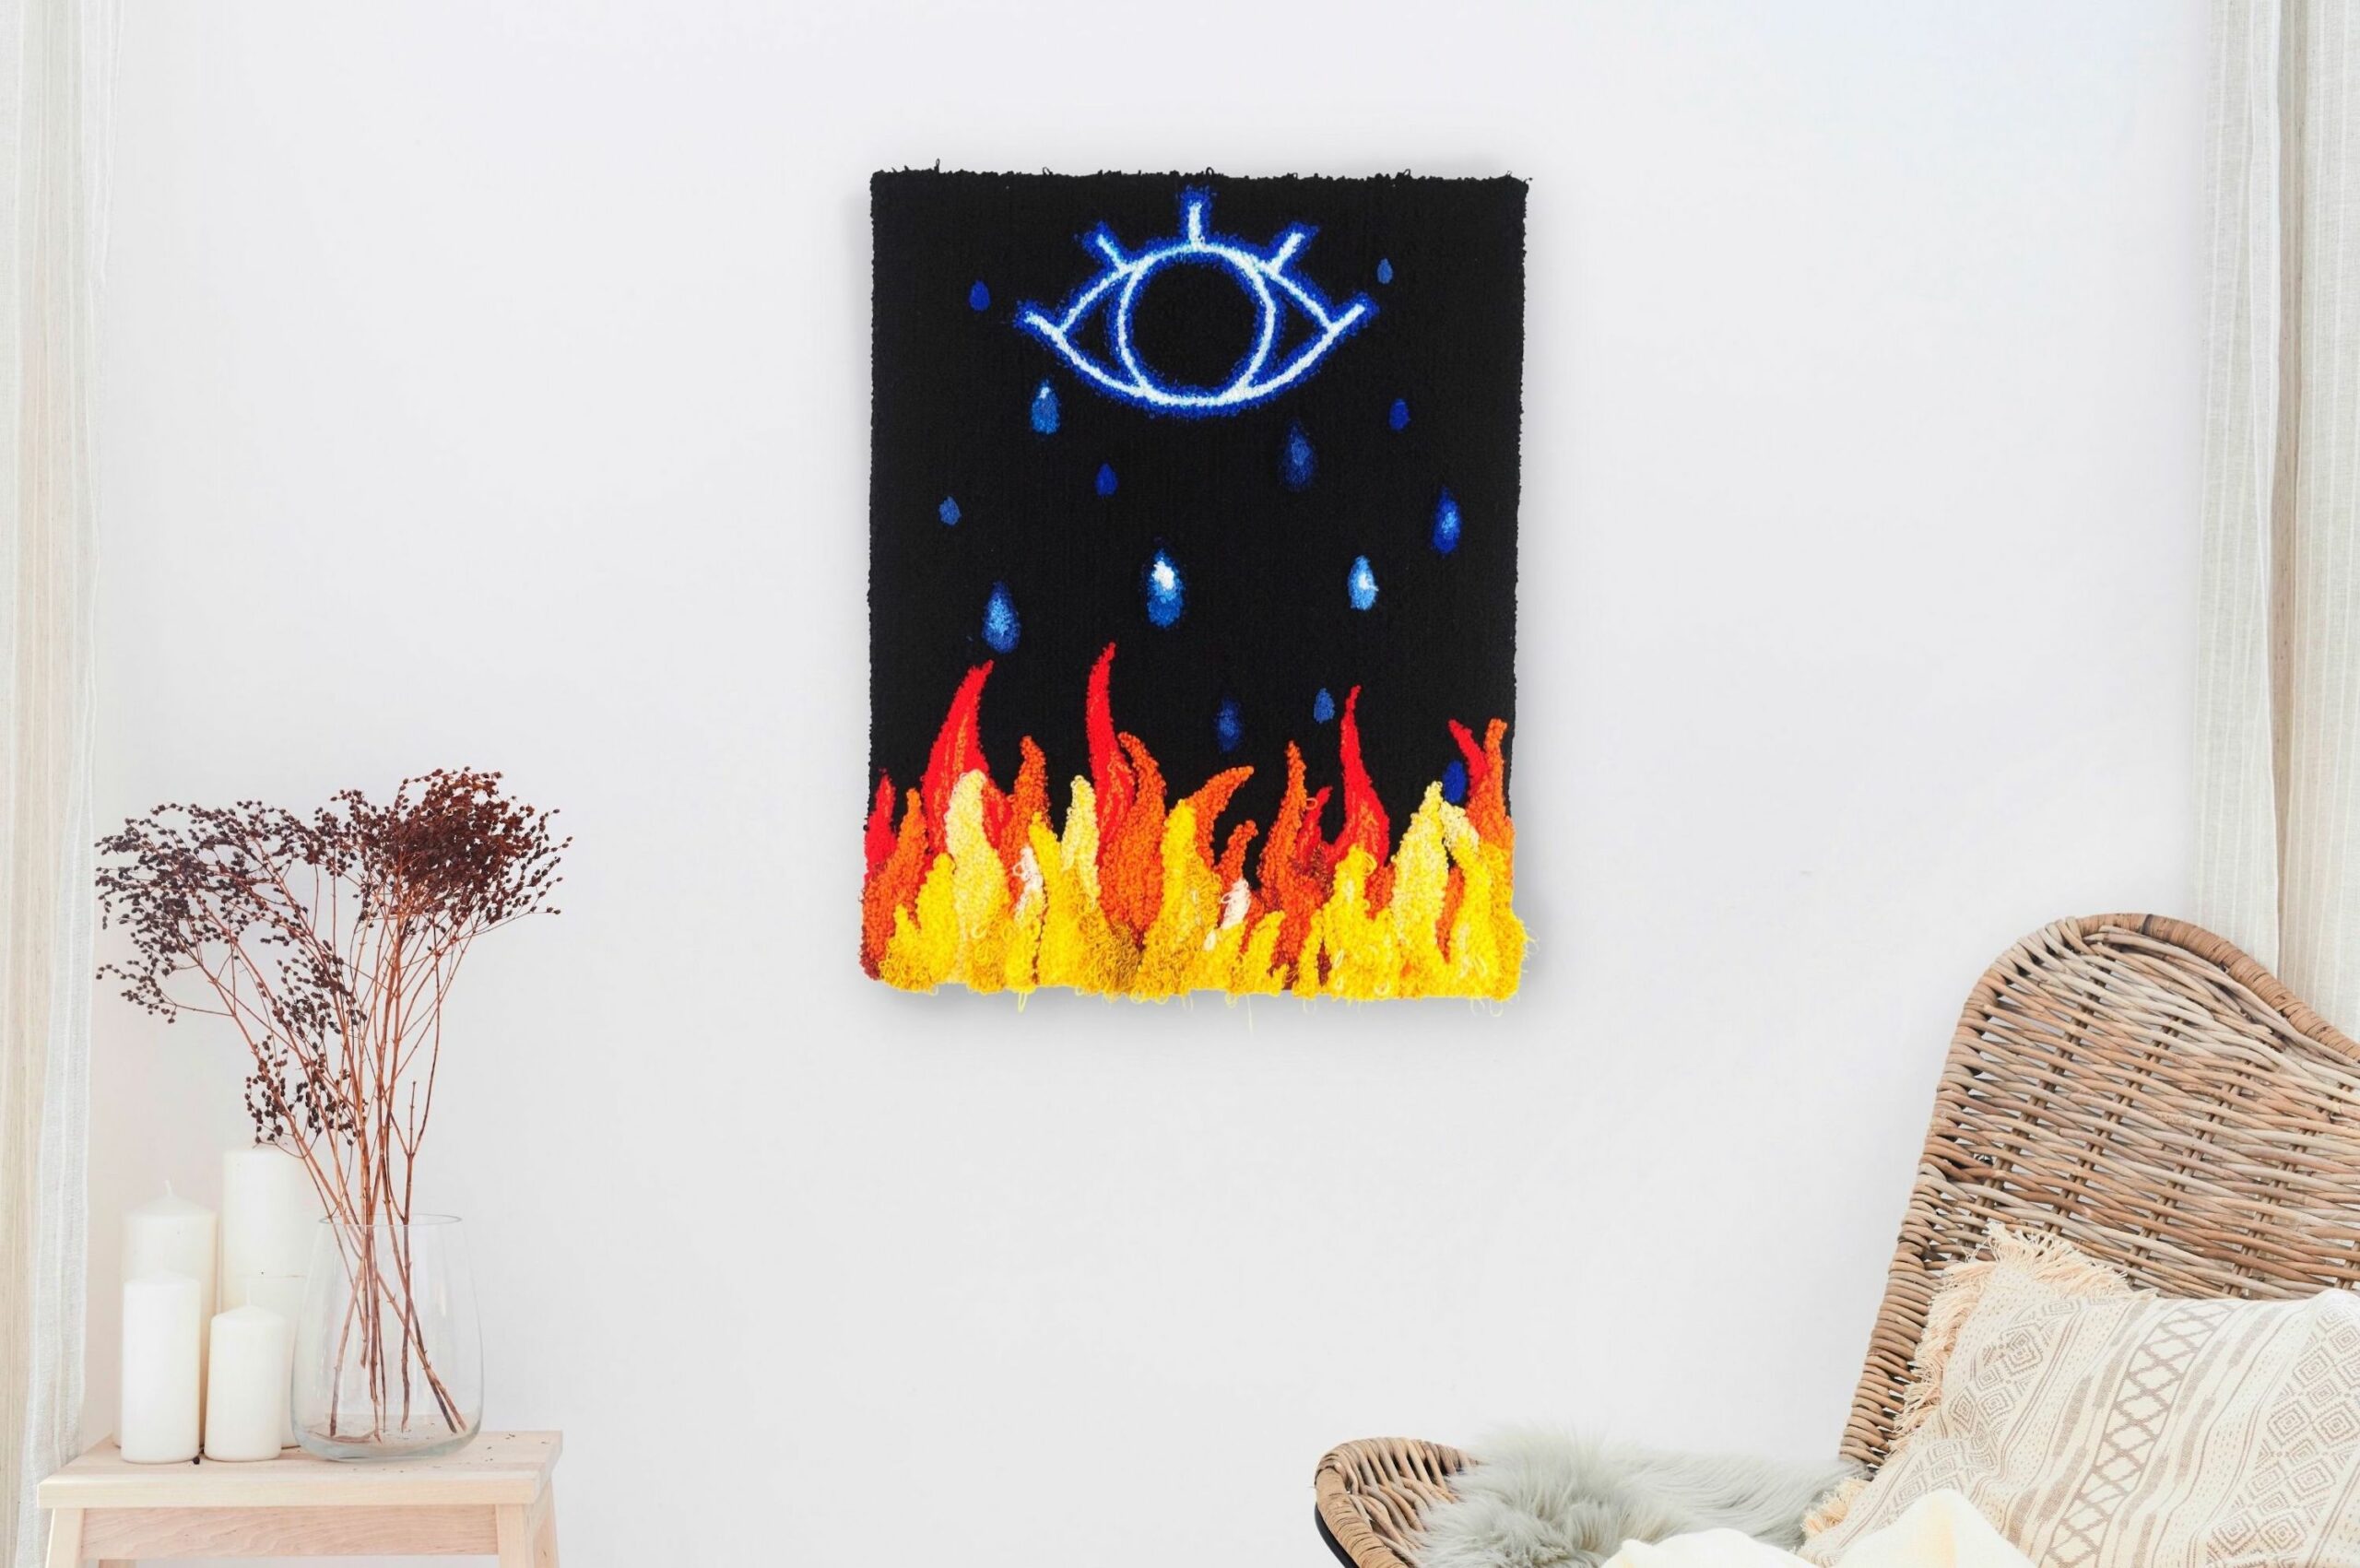 Yellow and red flames beneath the outline of an eye in blue against a black backdrop